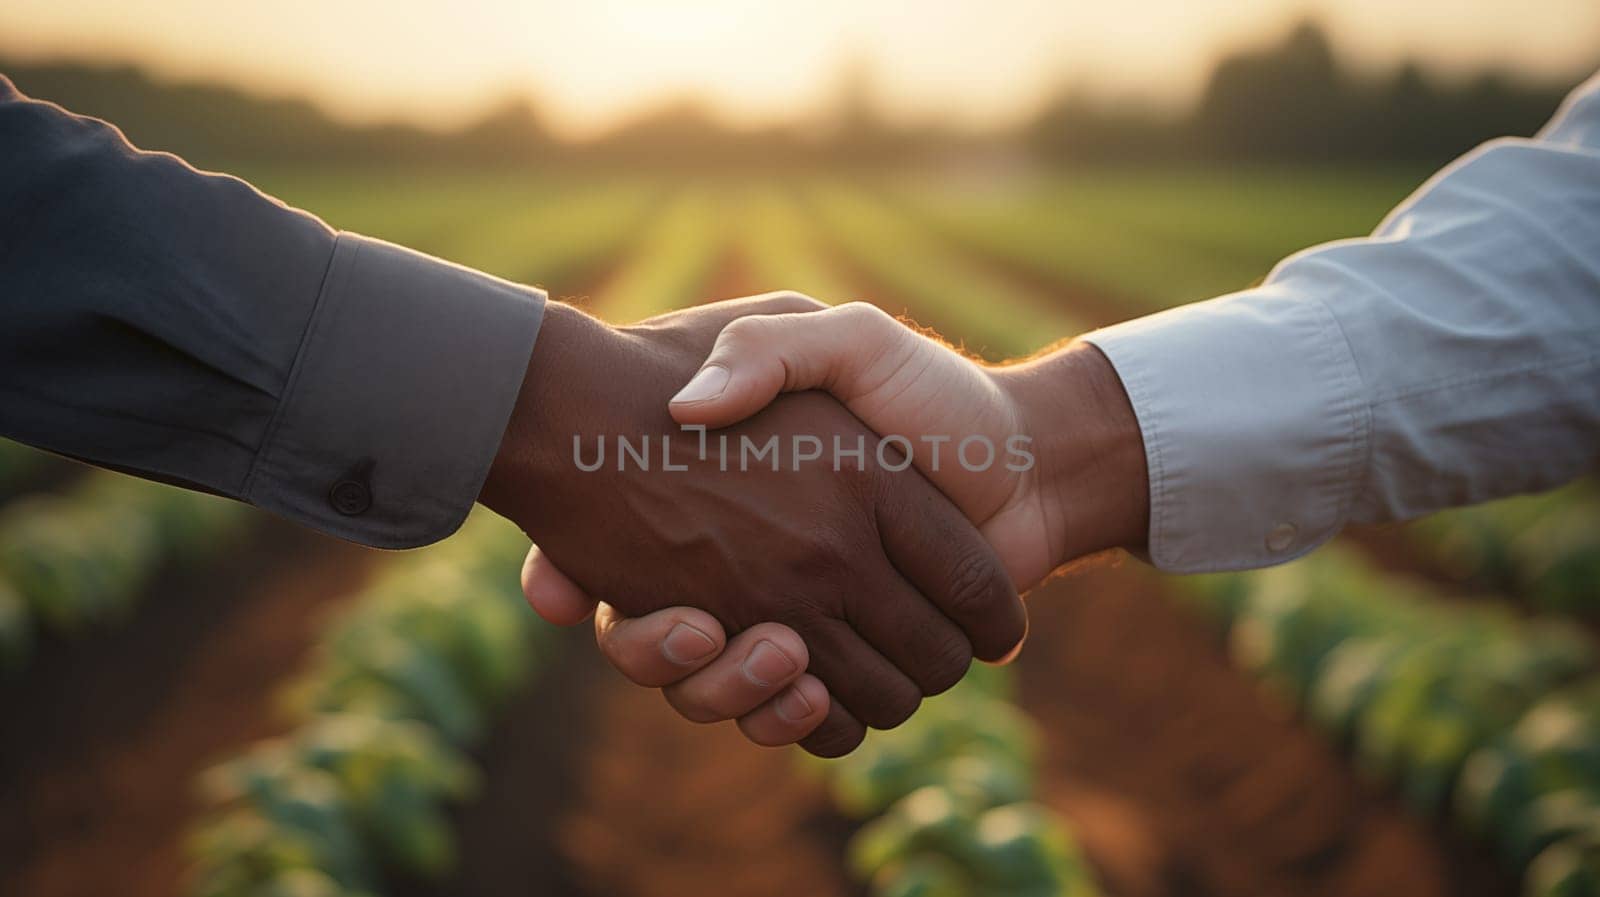 Handshake of two men in shirts, on the background of a farmer's field with green beds.